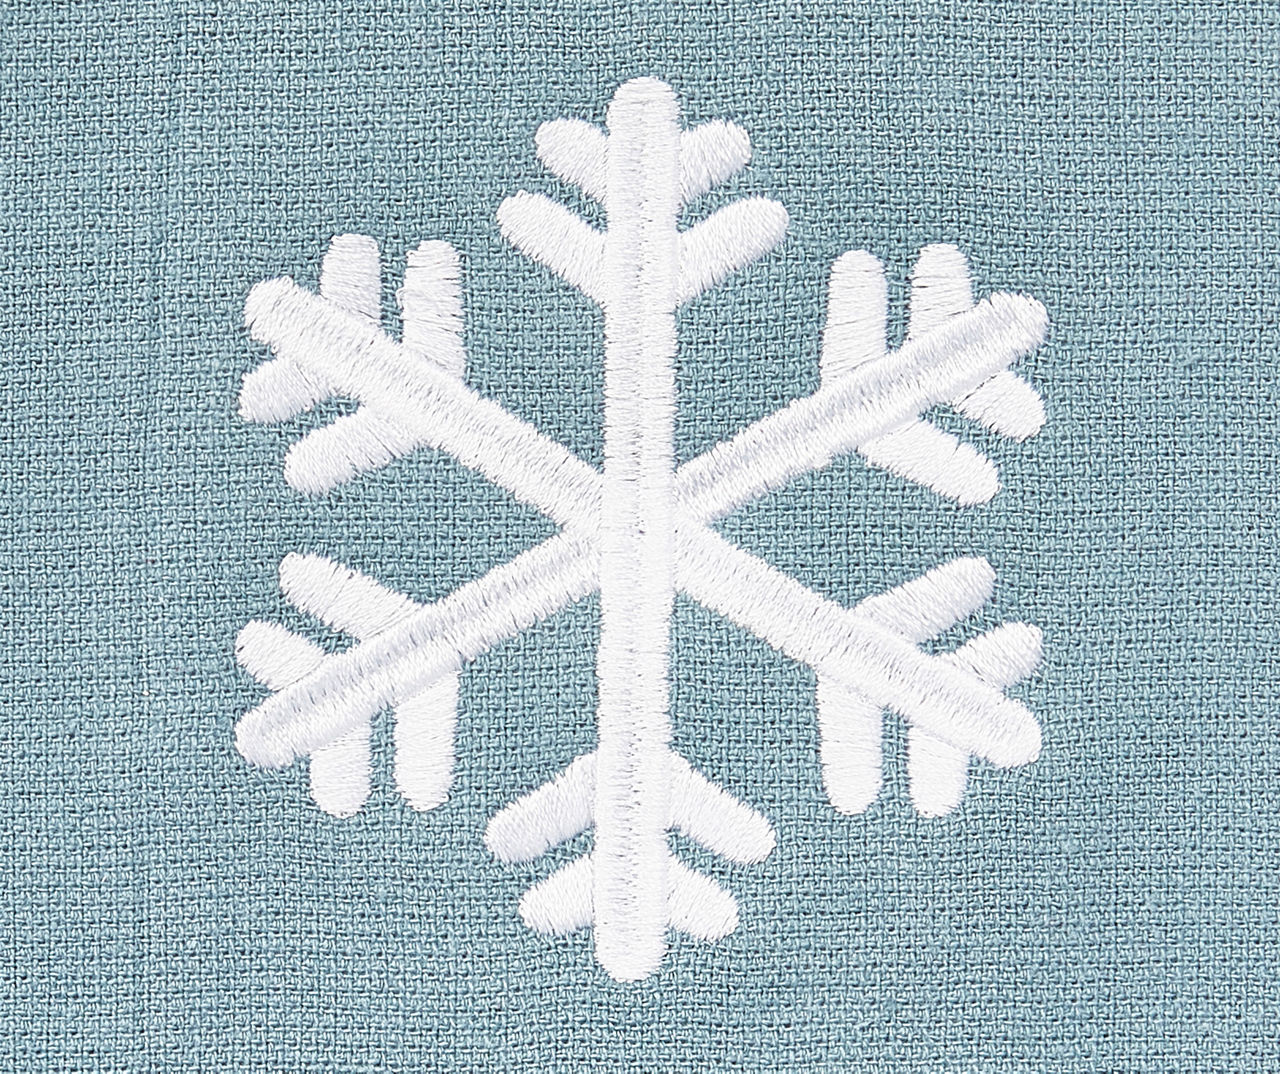 Christmas Kitchen Towels Set of 4 Snowflake Blue Dish Towels